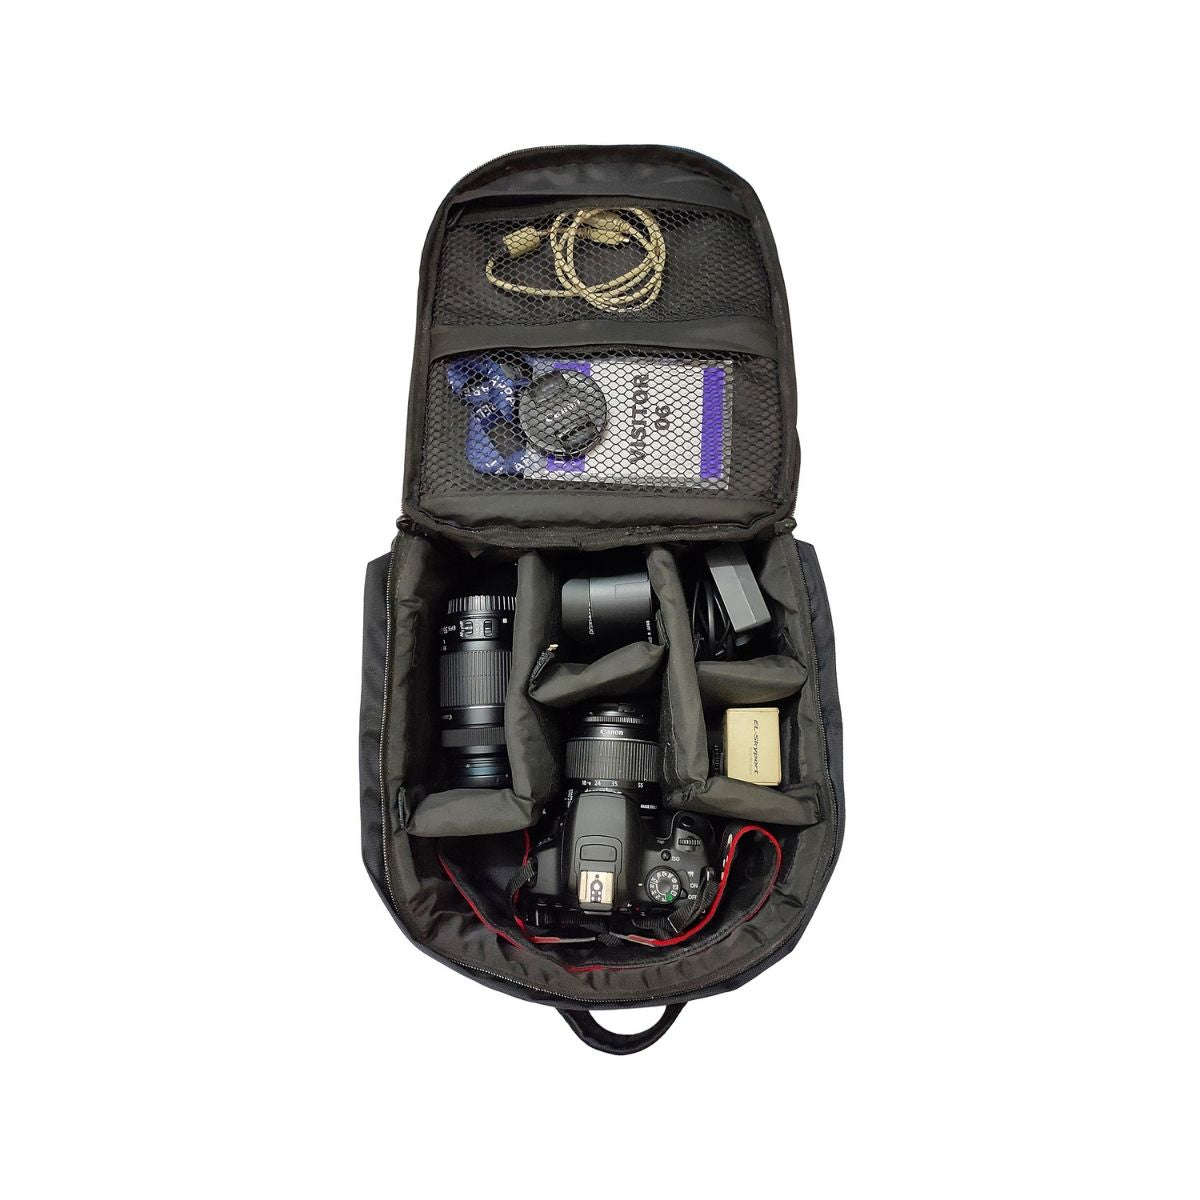 The ACPRO600 is a compact DSLR Holster Camera Bag by Ape Case.